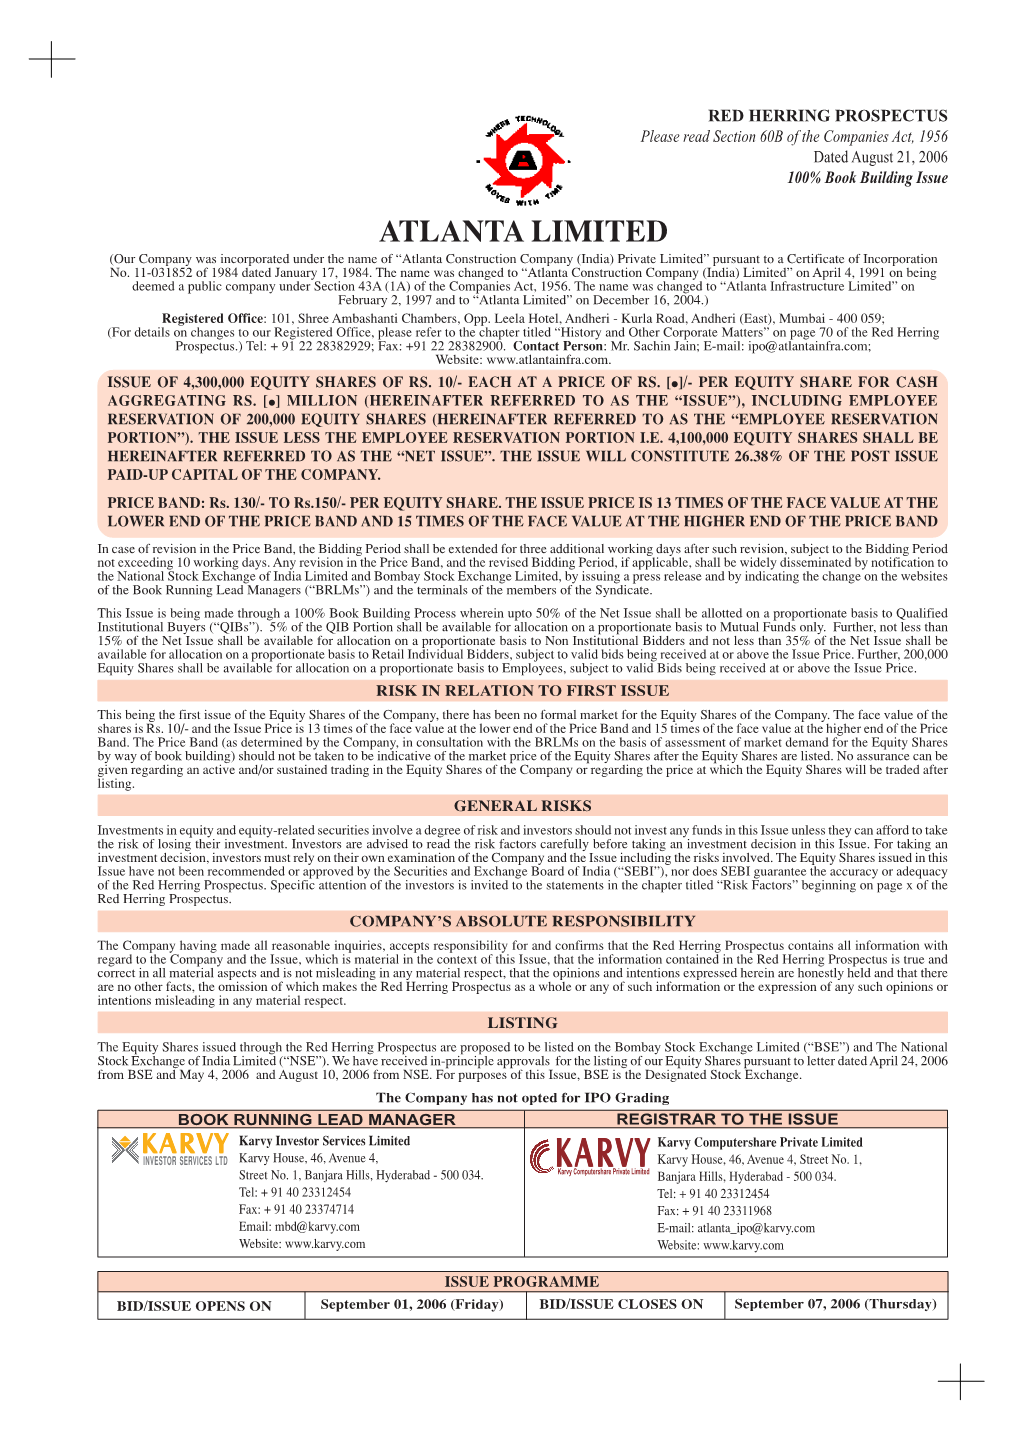 ATLANTA LIMITED (Our Company Was Incorporated Under the Name of “Atlanta Construction Company (India) Private Limited” Pursuant to a Certificate of Incorporation No